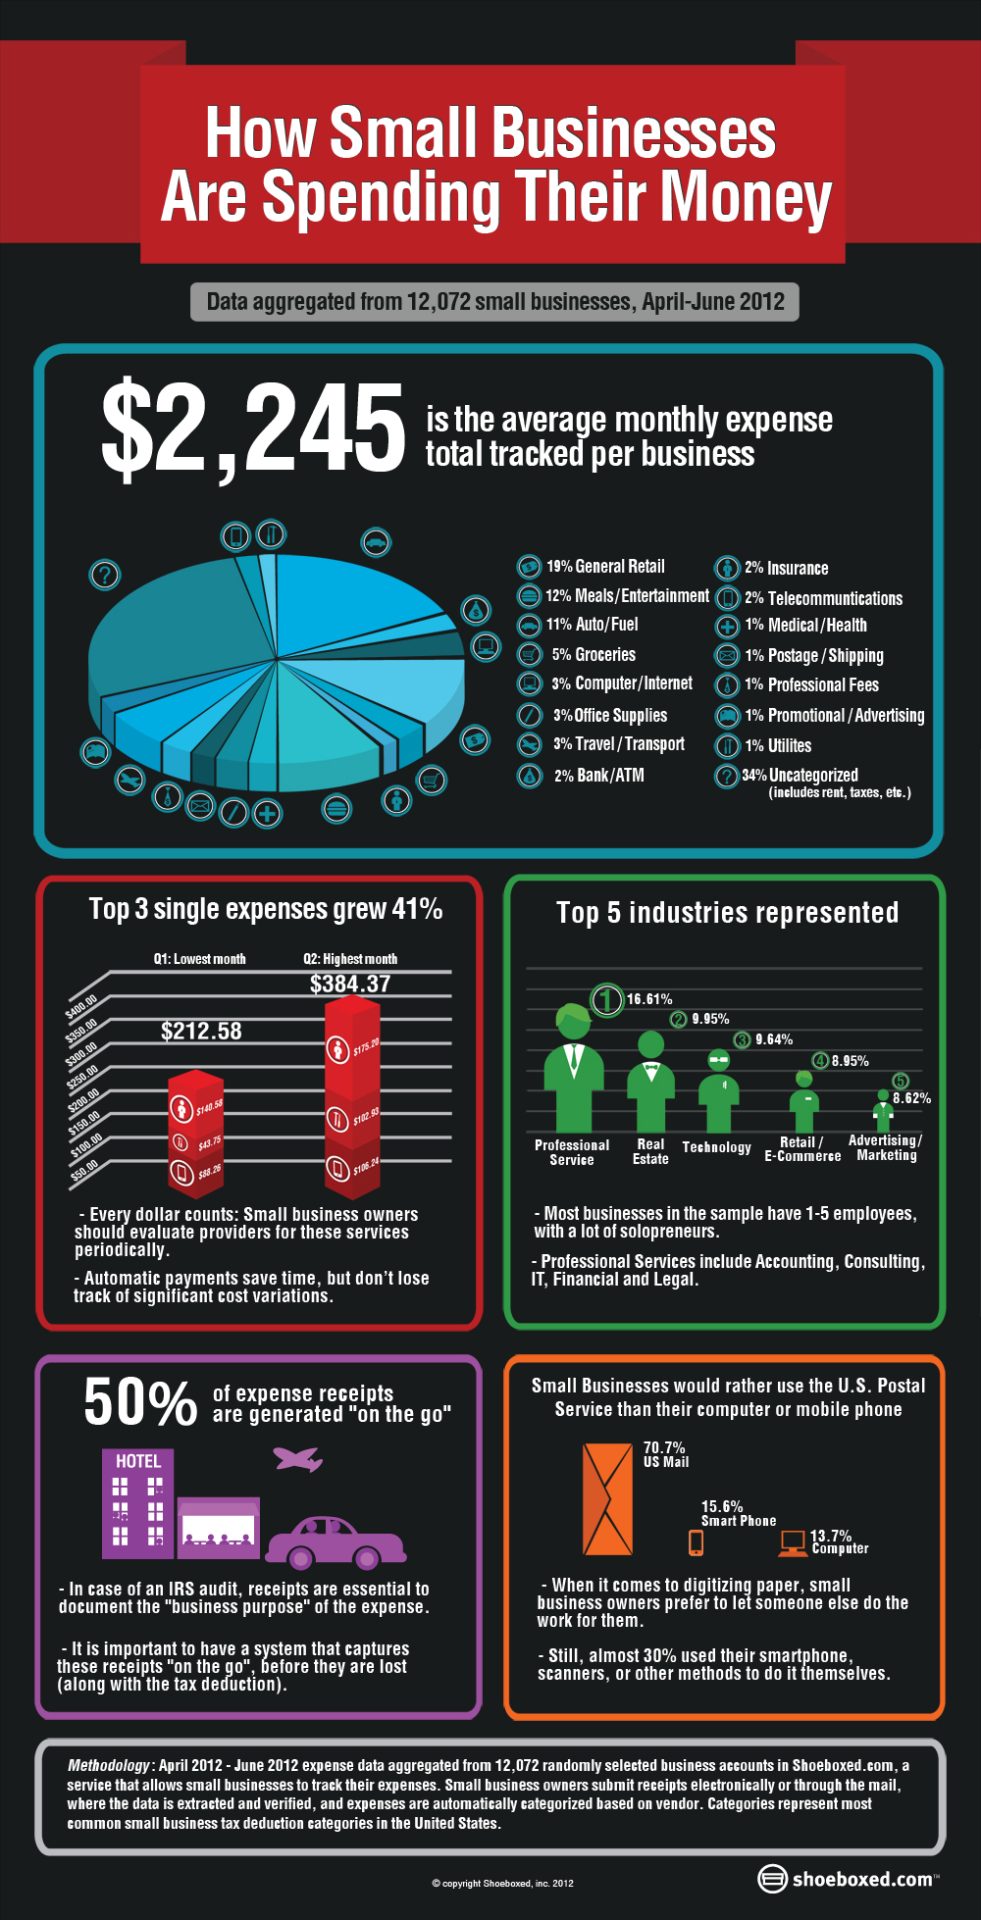 Small Business Expenses - Shoeboxed Infographic. How small businesses are spending their money from data aggregated from 12,072 small businesses, from April to June of 2012.